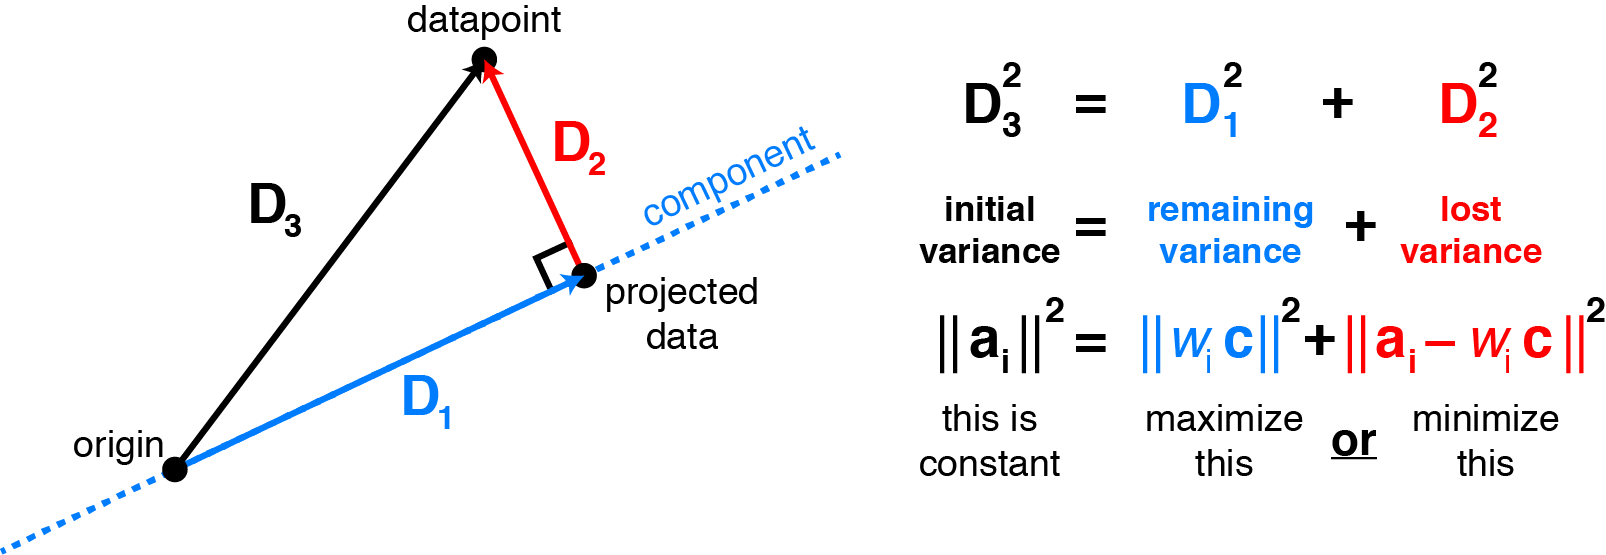 Consider a datapoint $\mathbf{a}_i$ (row $i$ of the data matrix $\mathbf{X}$). Assuming the data are mean-centered, the projection of $\mathbf{a}_i$ onto the principal components relates the remaining variance to the squared residual by the Pythagorean theorem. Choosing the components to maximize variance is the same as choosing them to minimize the squared residuals.